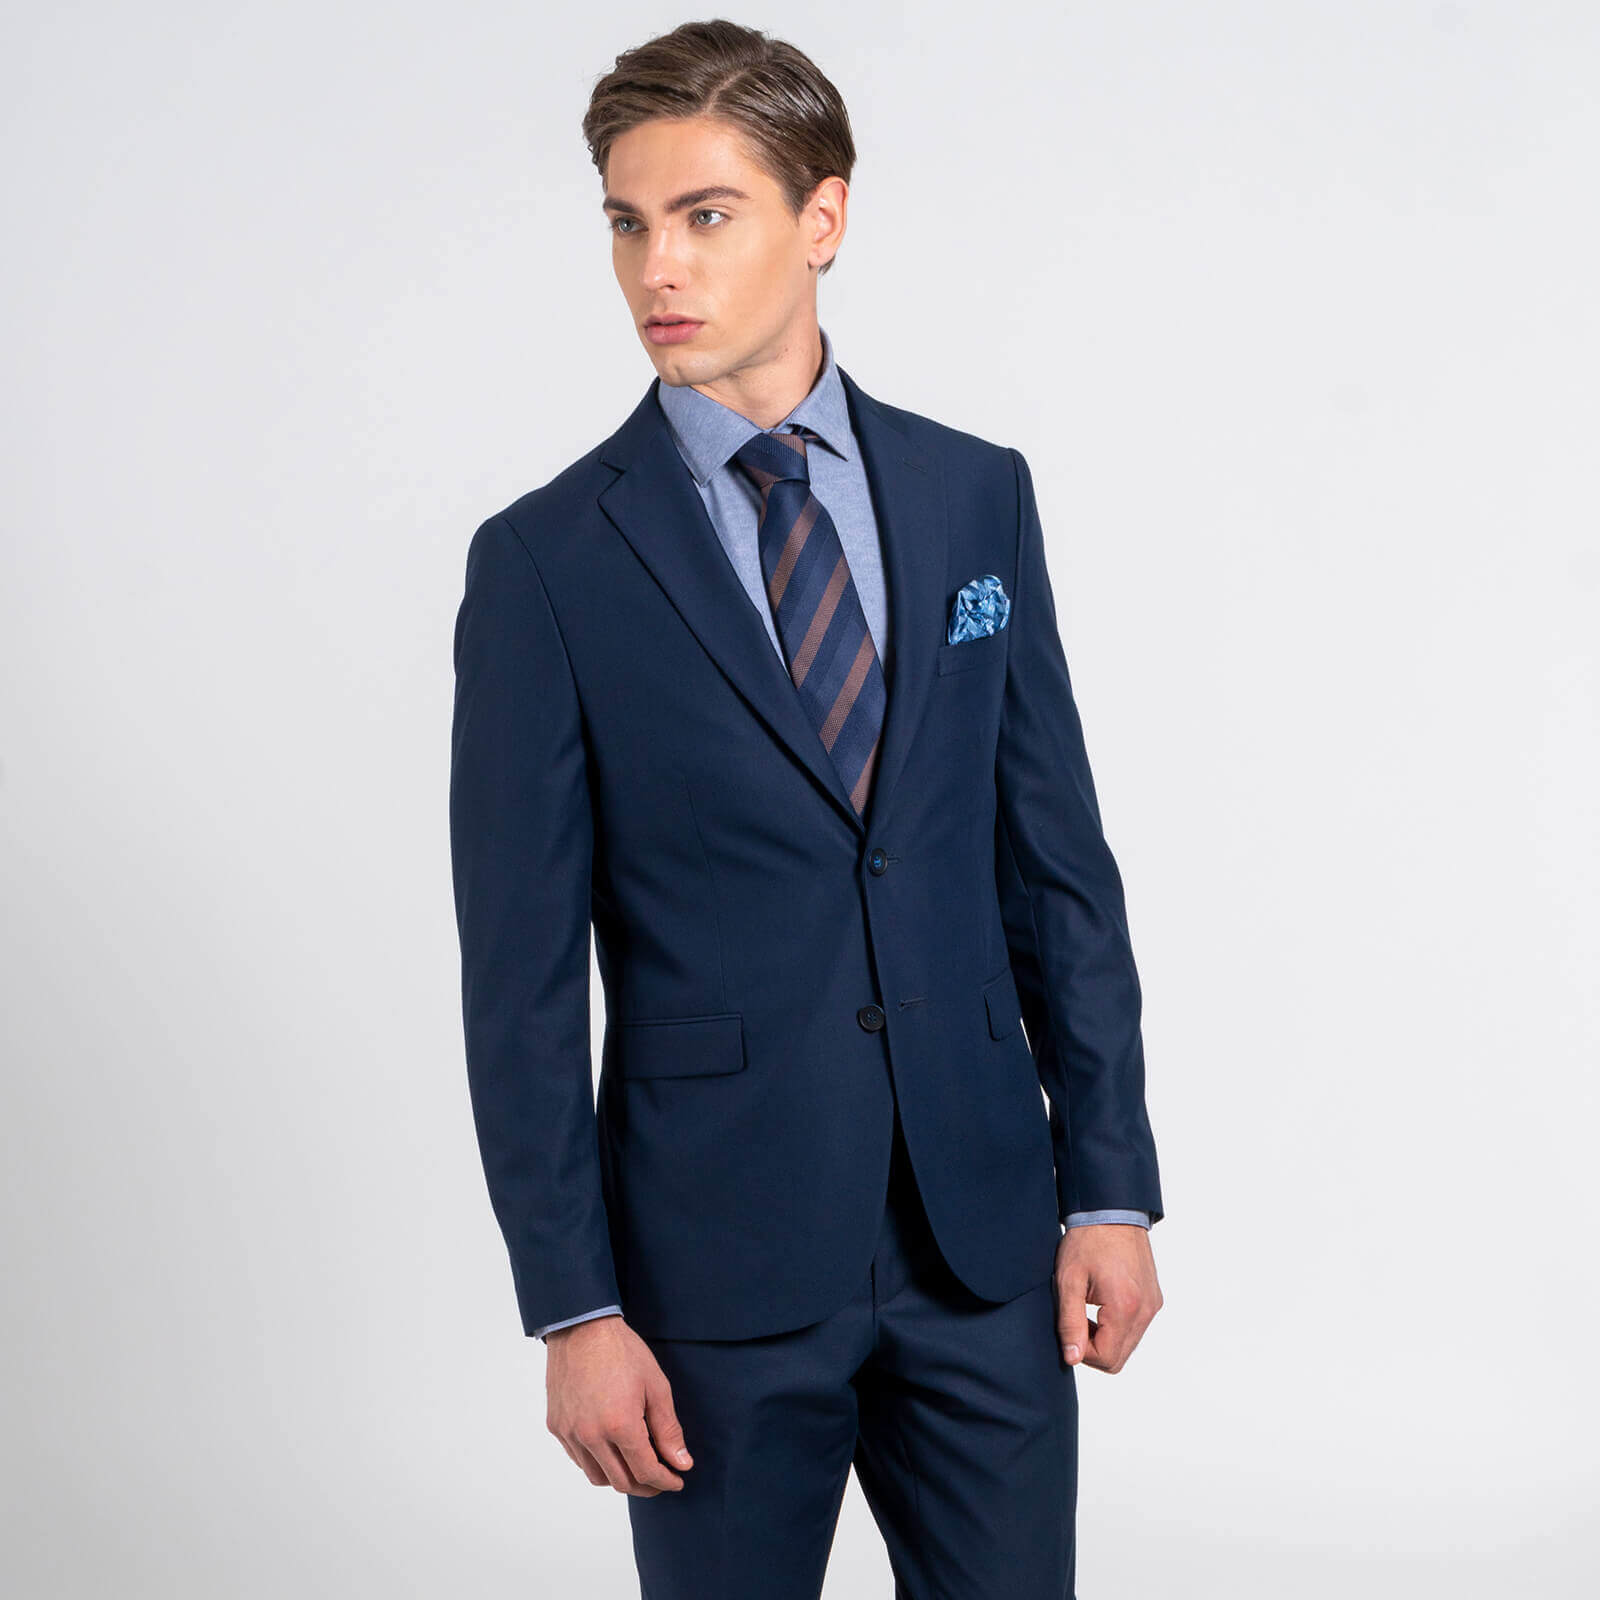 Prince Oliver Blue Suit 100% WoolTouch (Modern Fit) - Prince Oliver